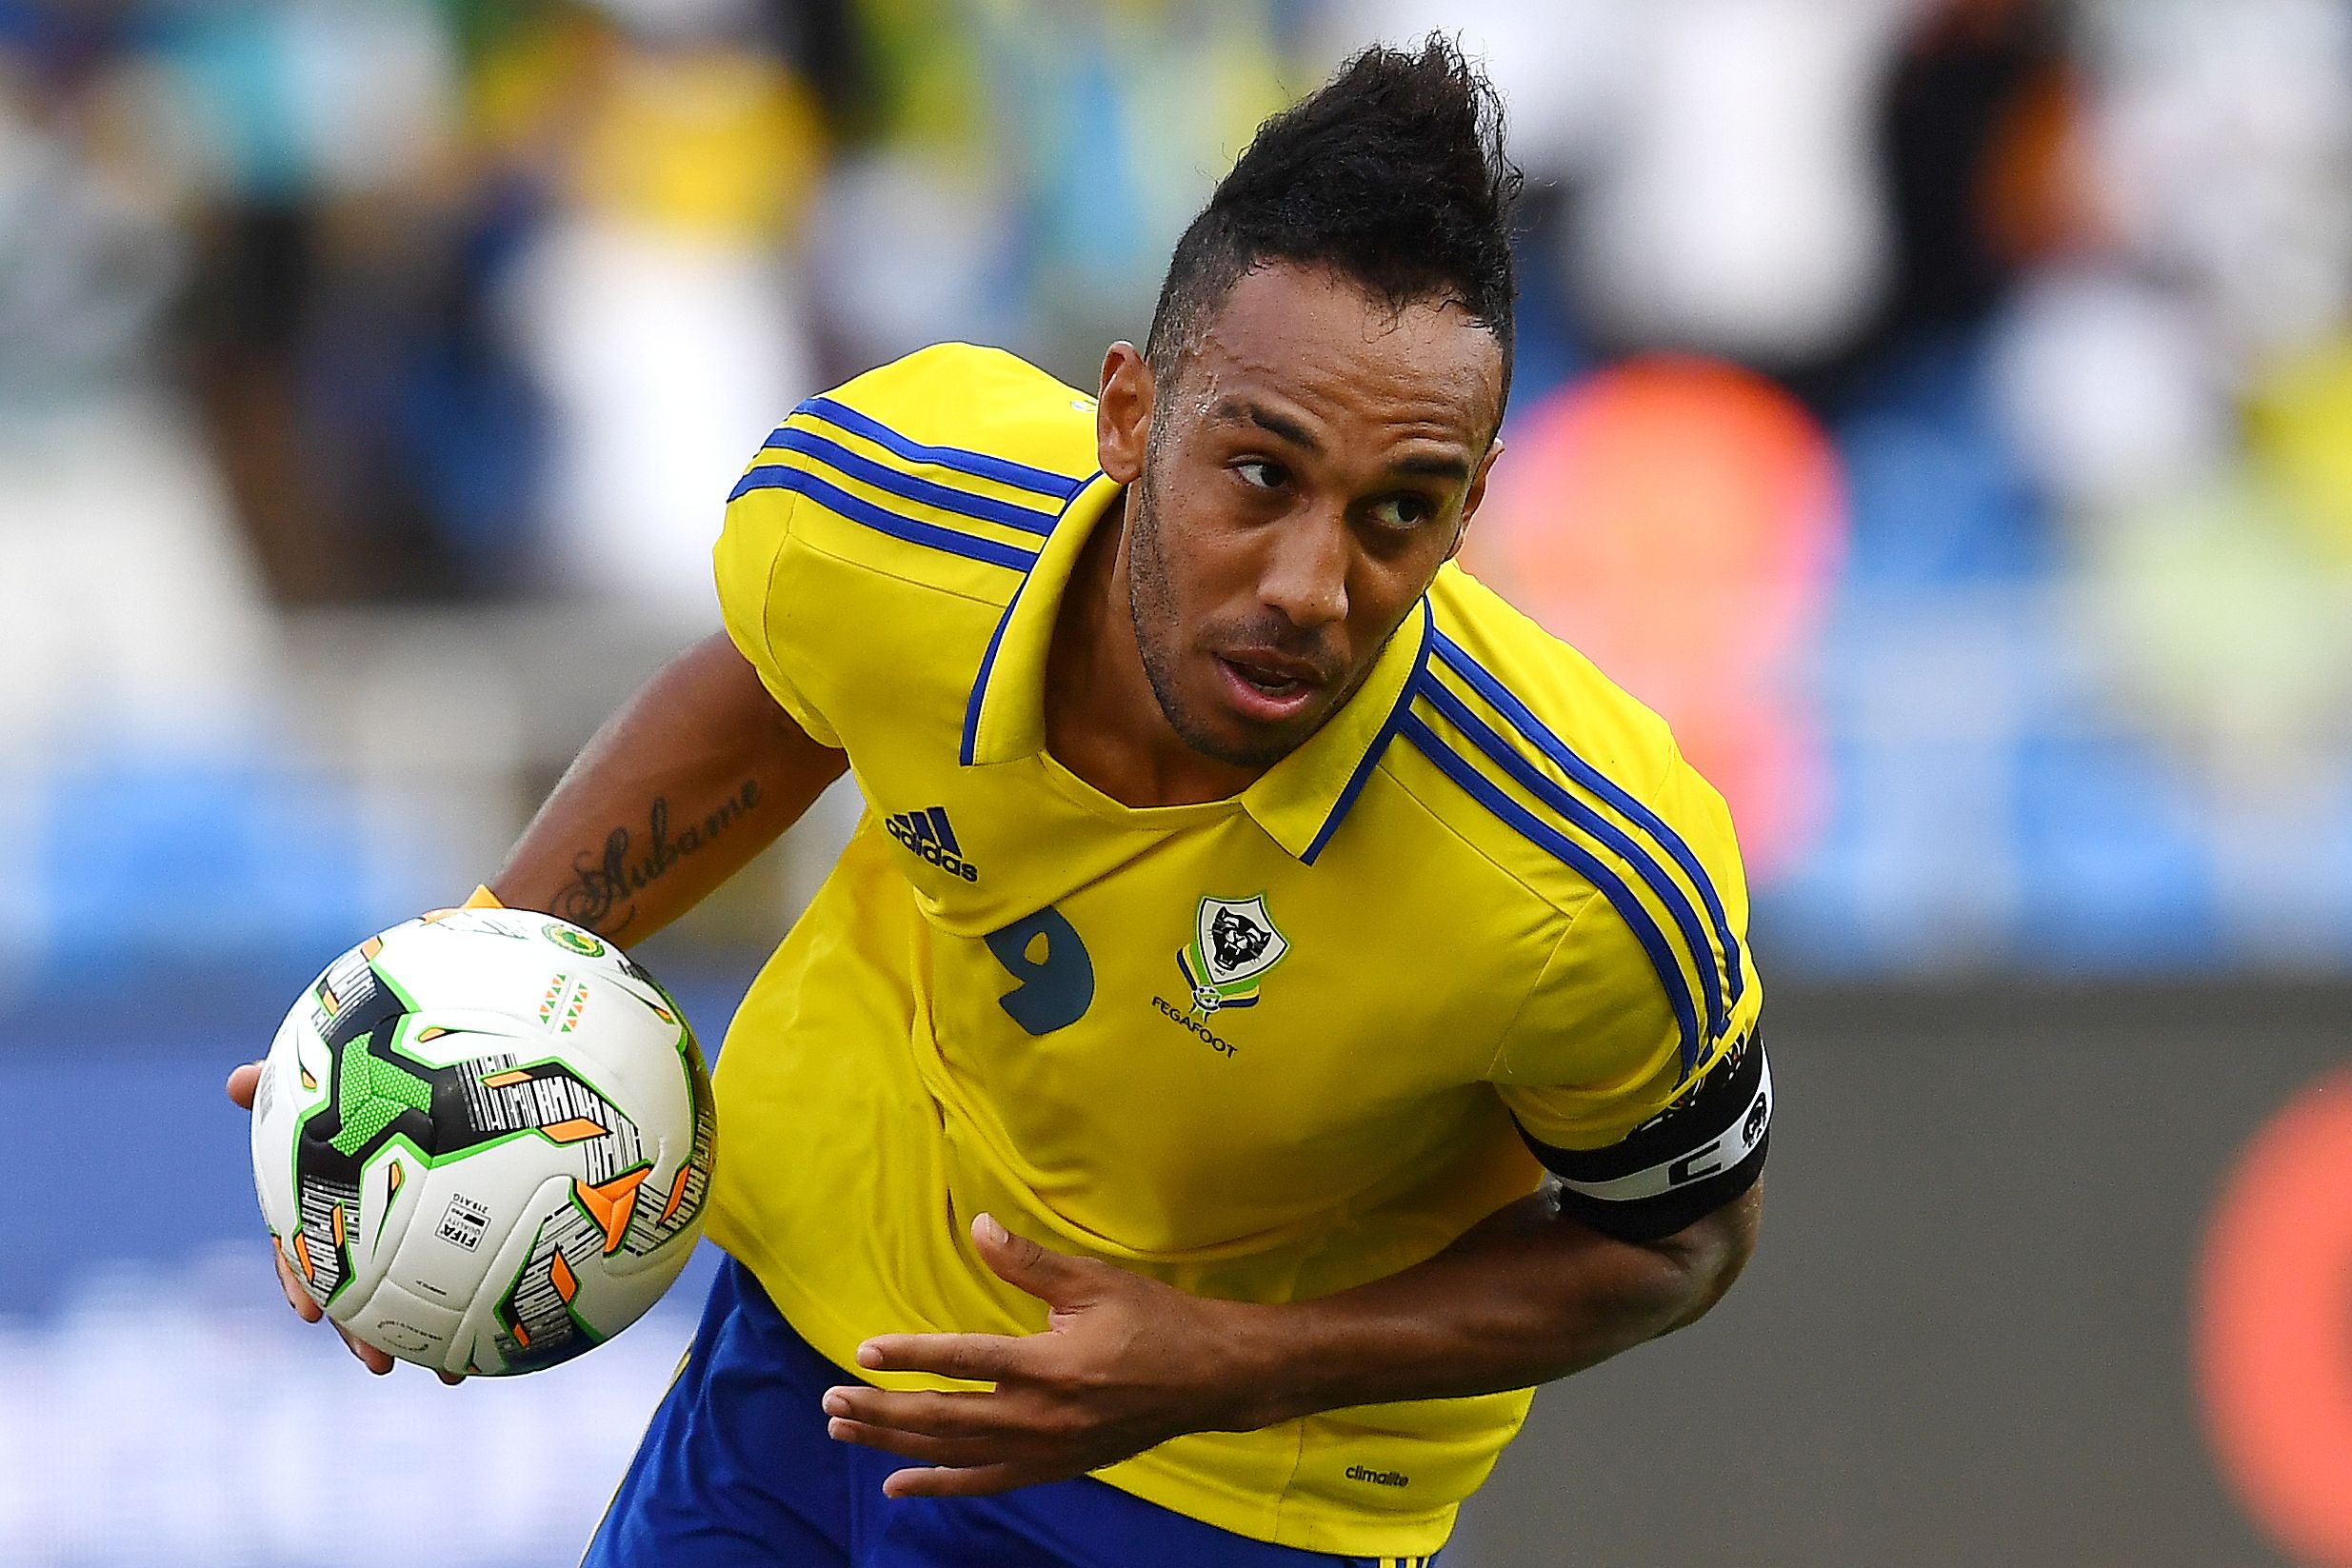 Pierre-Emerick Aubameyang reacts after scoring a penalty for Gabon against Burkina Faso at the Africa Cup of Nations in January 2017.